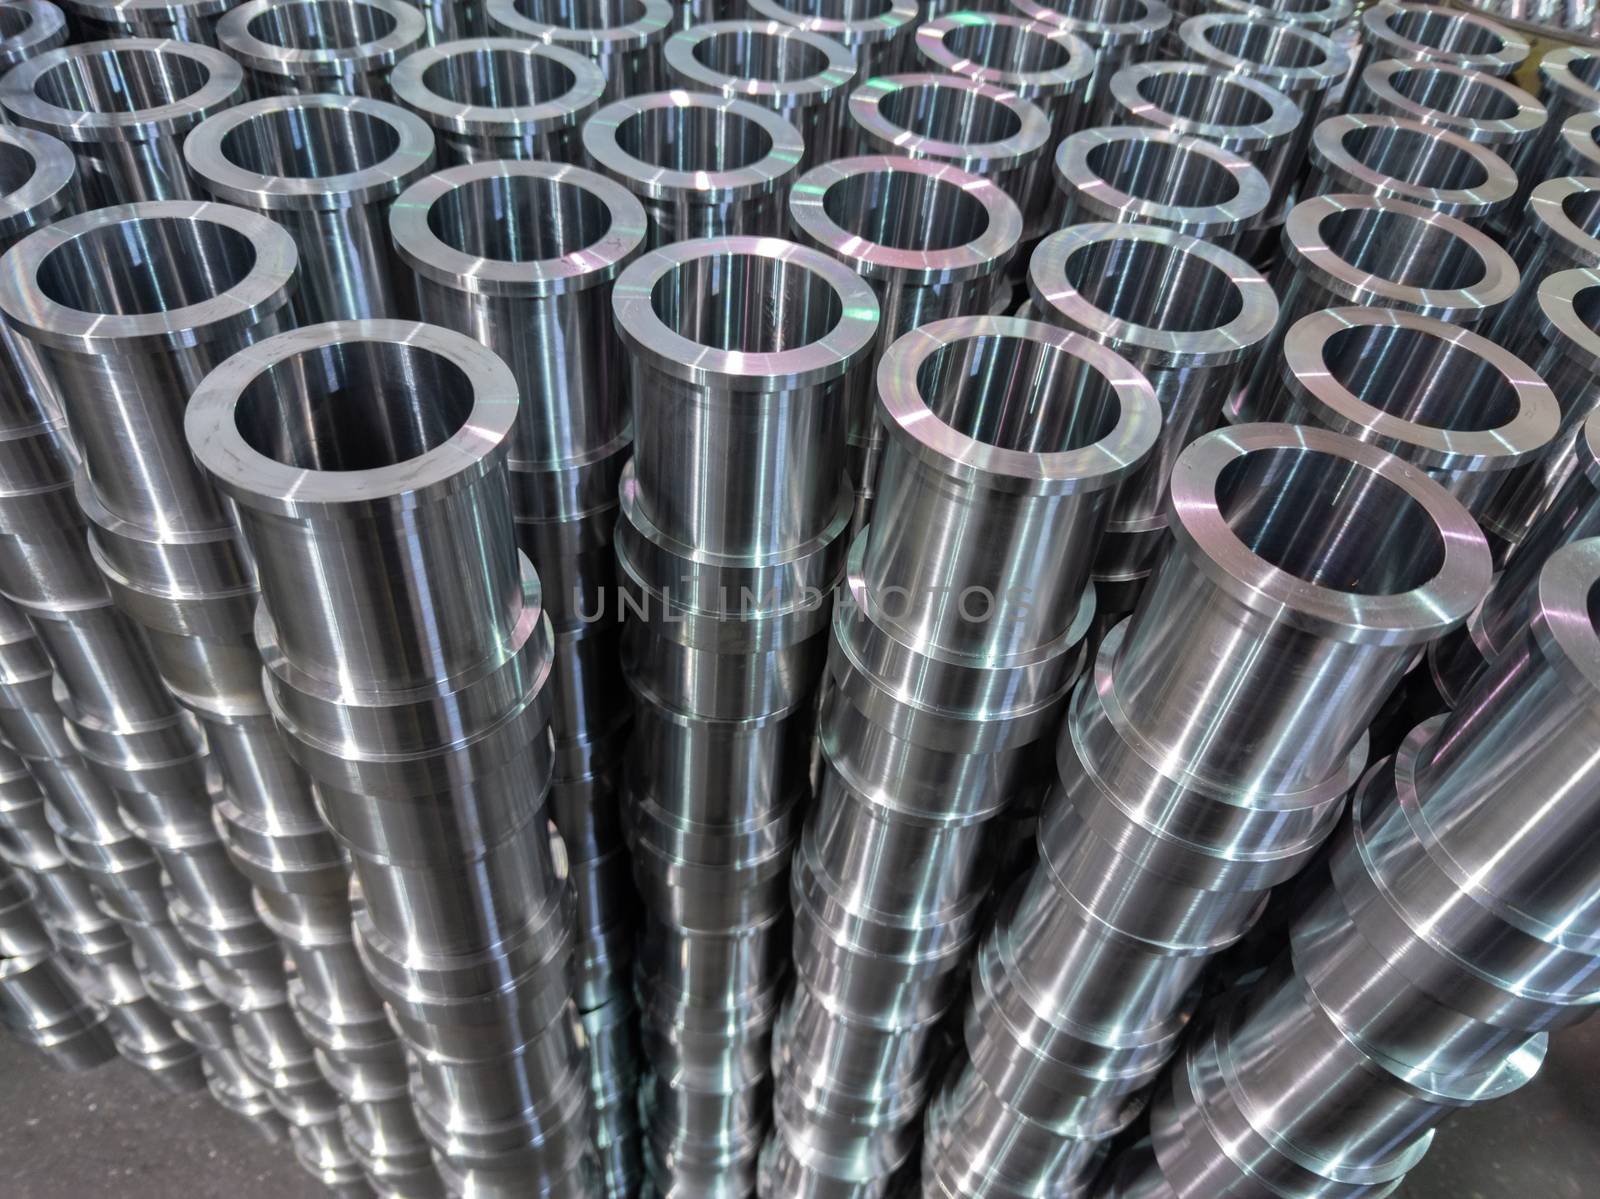 abstract industrial shiny steel production stack background with cnc machined pipes - selective focus and lens blur technique. View from above.